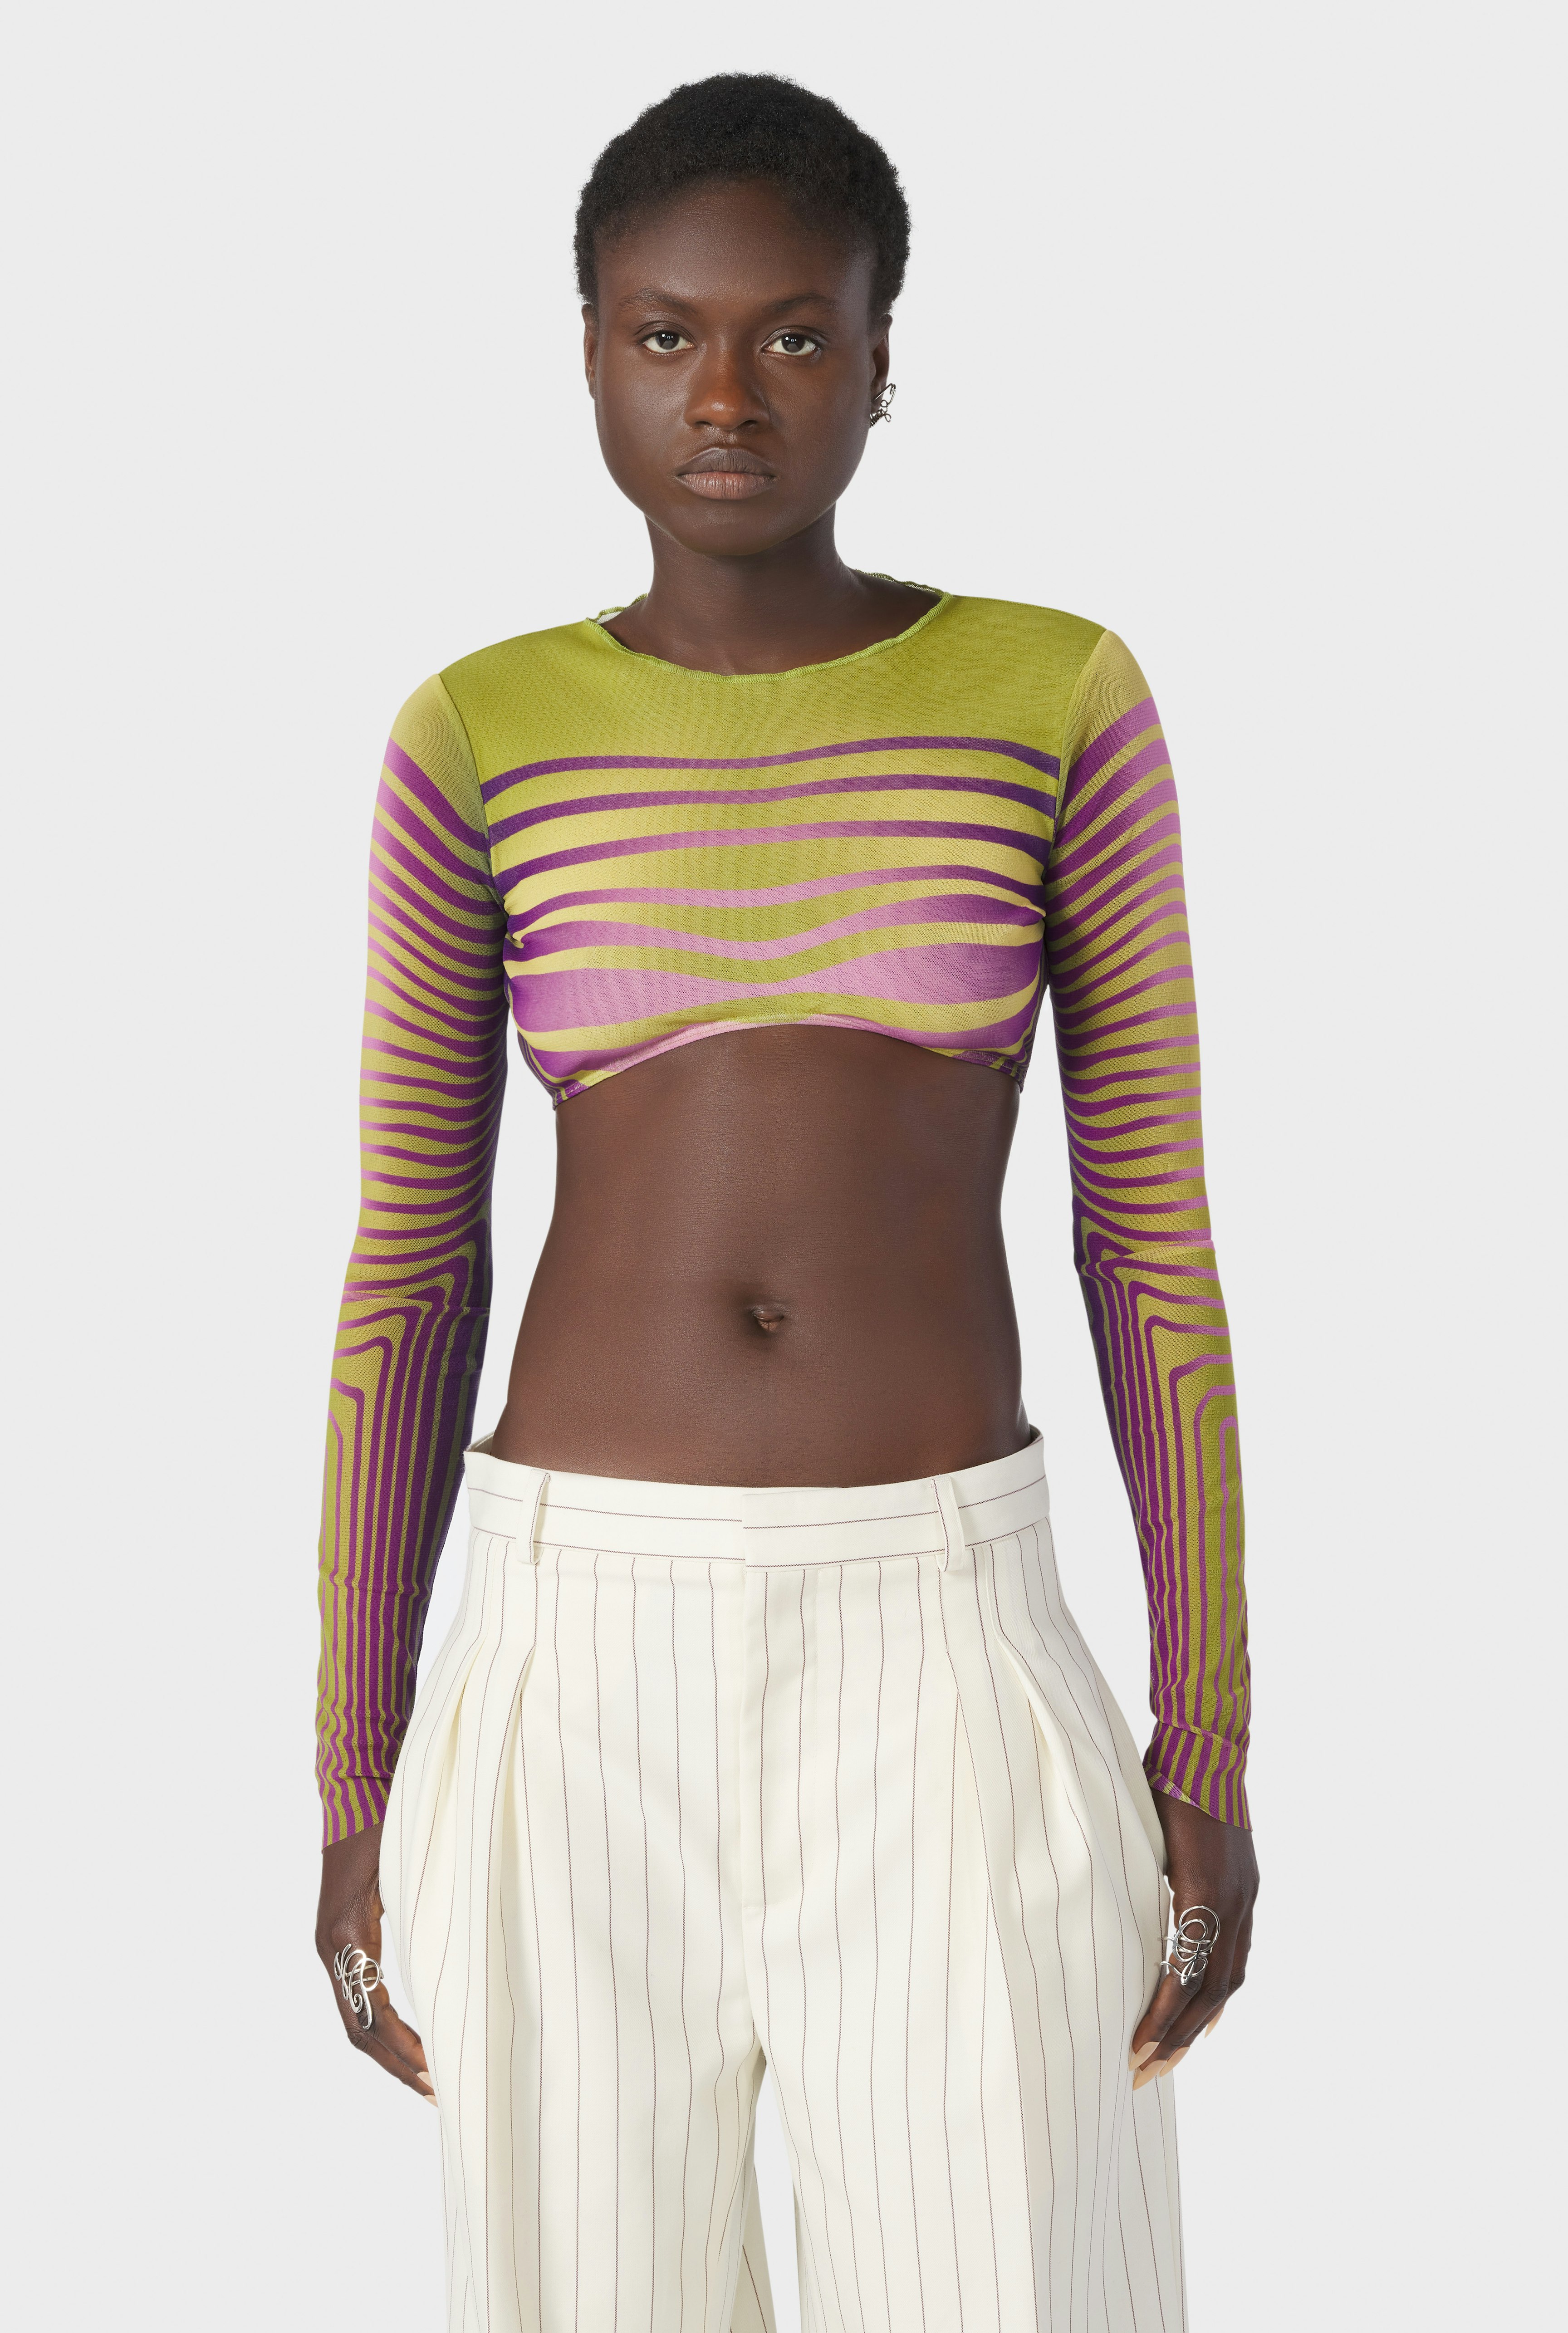 The Green Body Morphing Crop Top